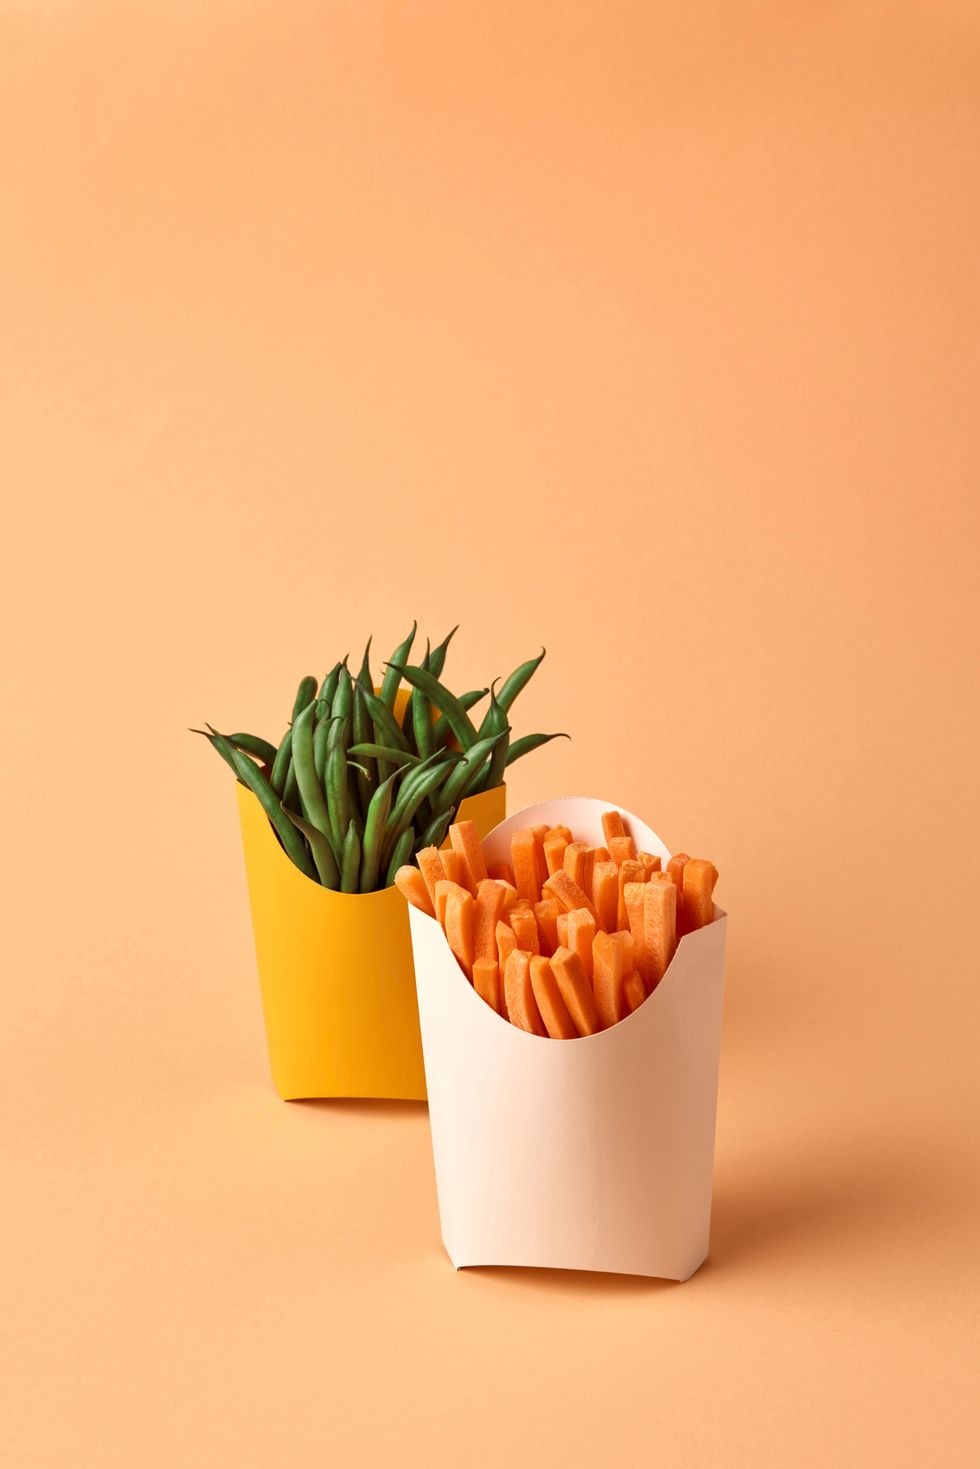 fresly picked natural organic vegetables french beans and carrots sticks in a paper cups on a paper background healthy right snack for schoolboy place for text